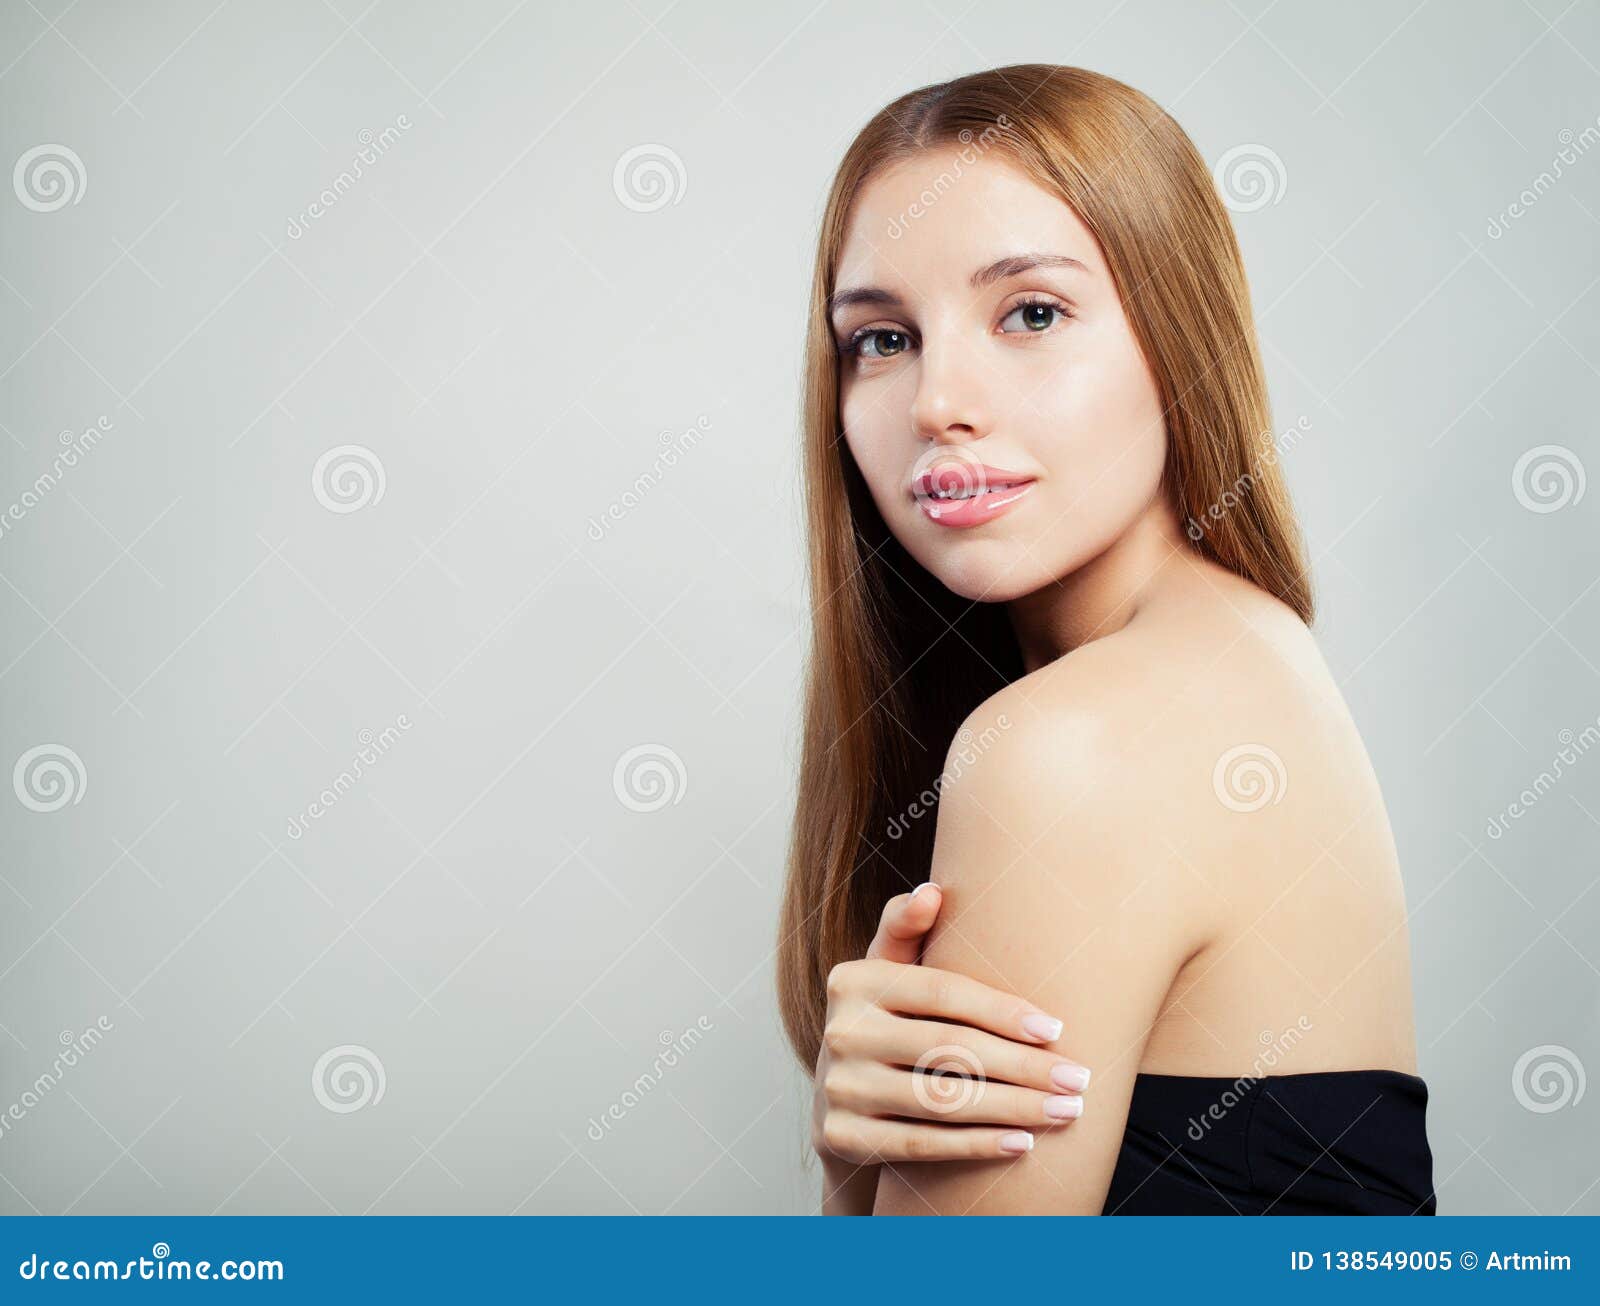 beauty portrait of yute young woman with healthy hair